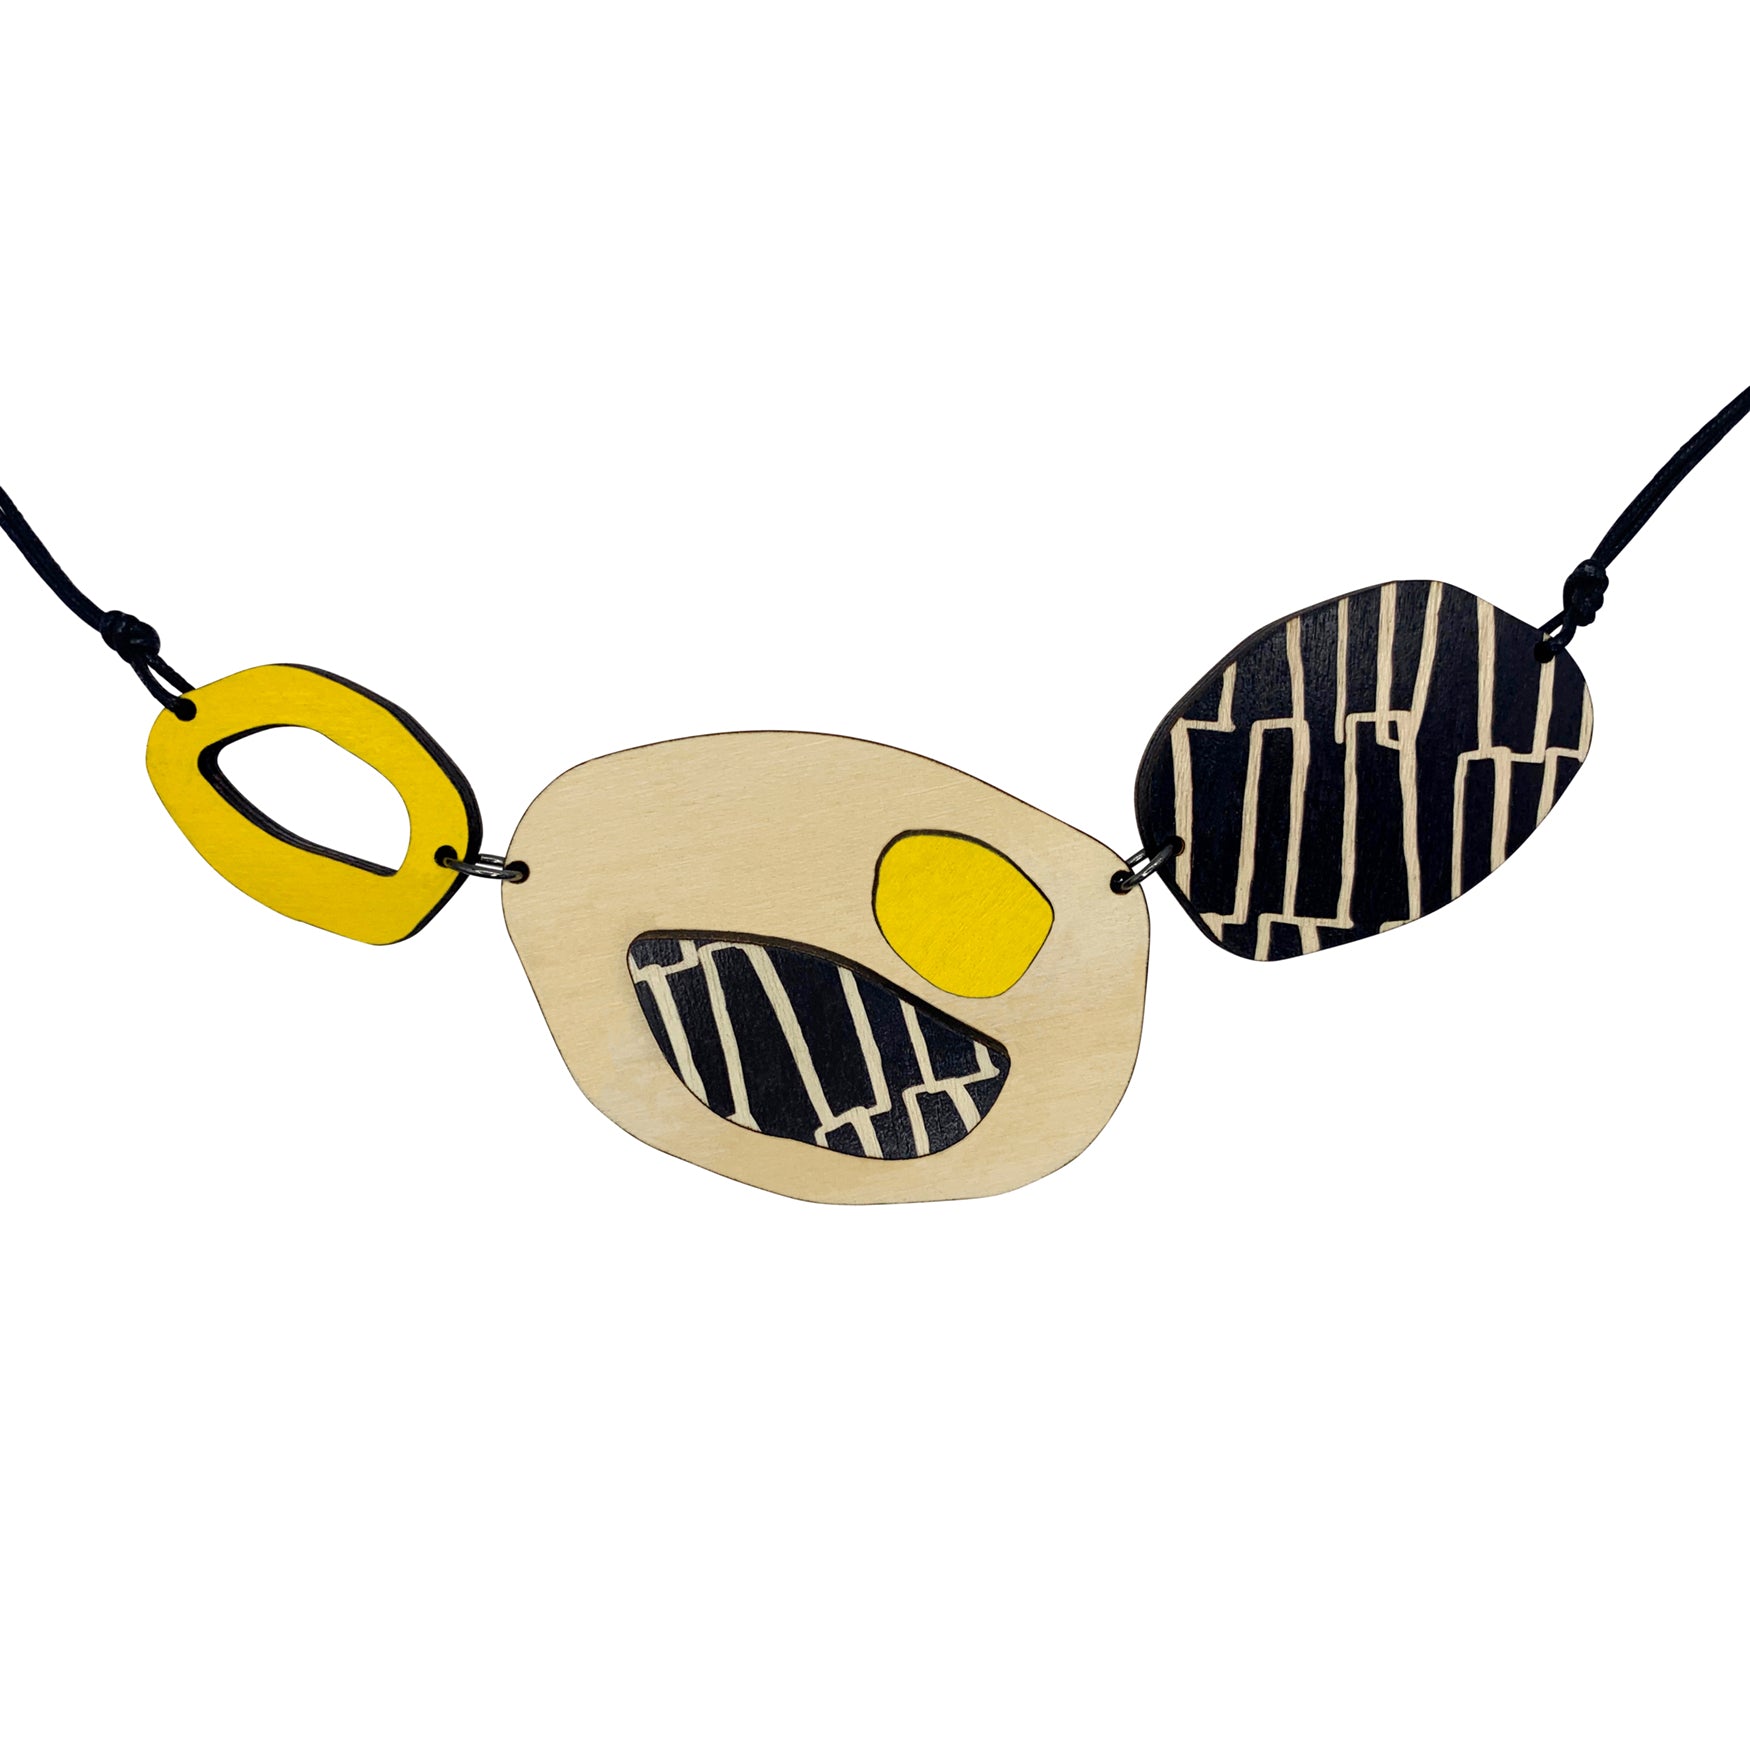 City pattern necklace in yellow